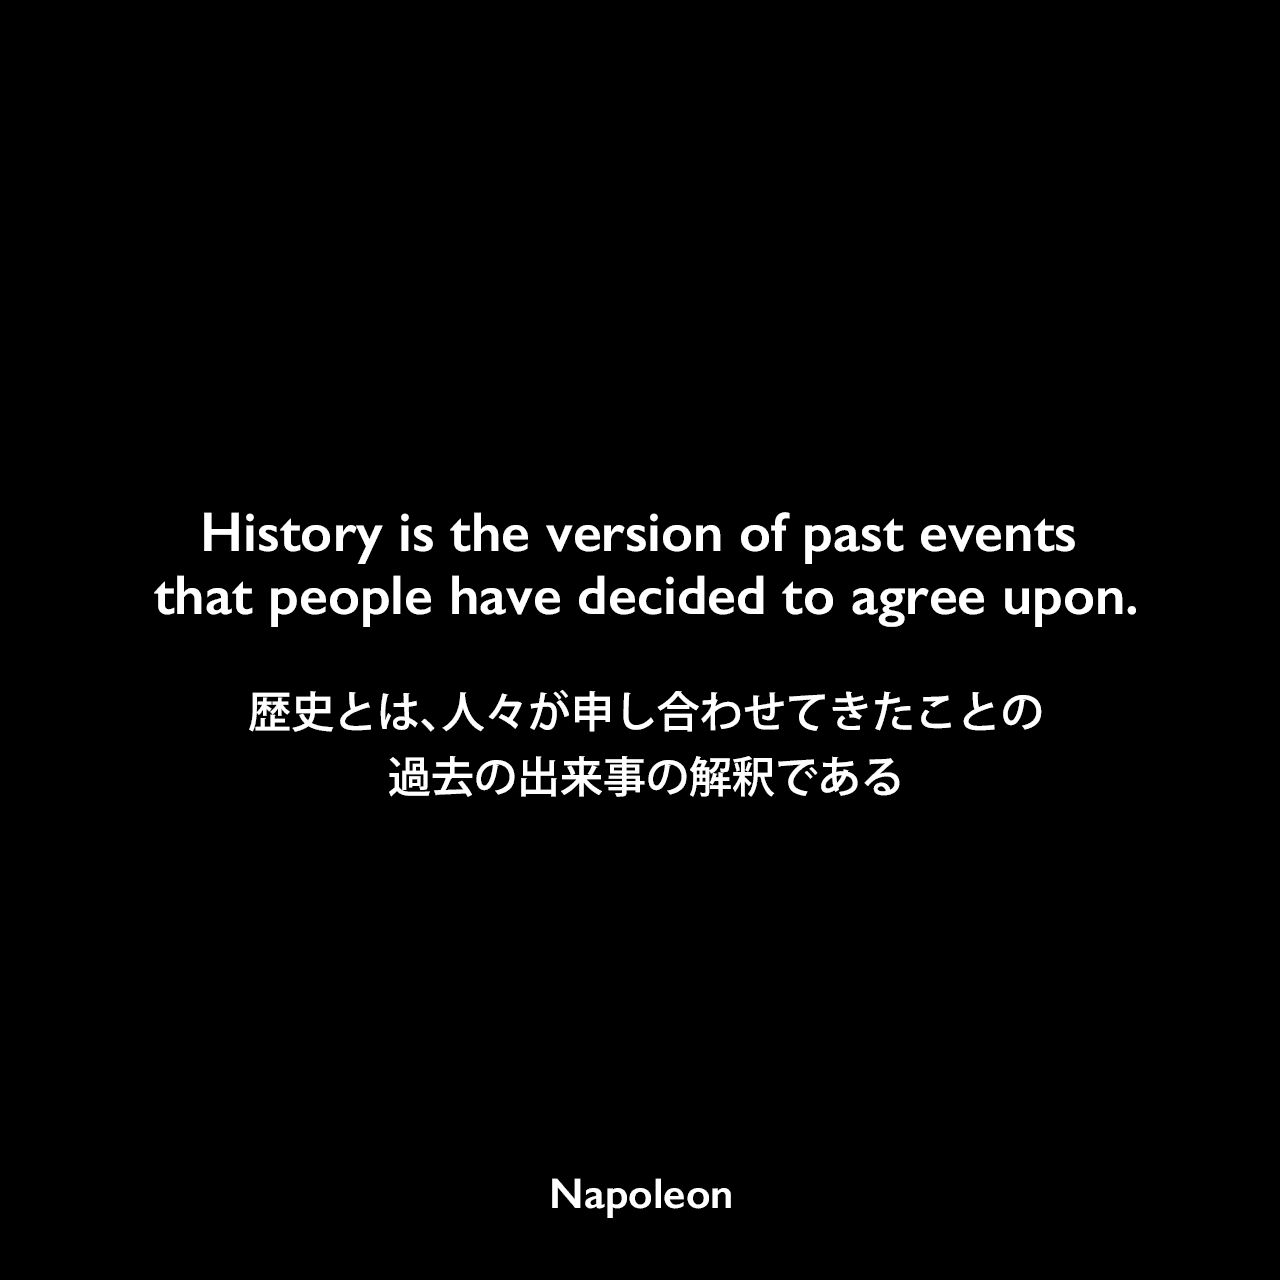 History is the version of past events that people have decided to agree upon.歴史とは、人々が申し合わせてきたことの過去の出来事の解釈であるNapoleon